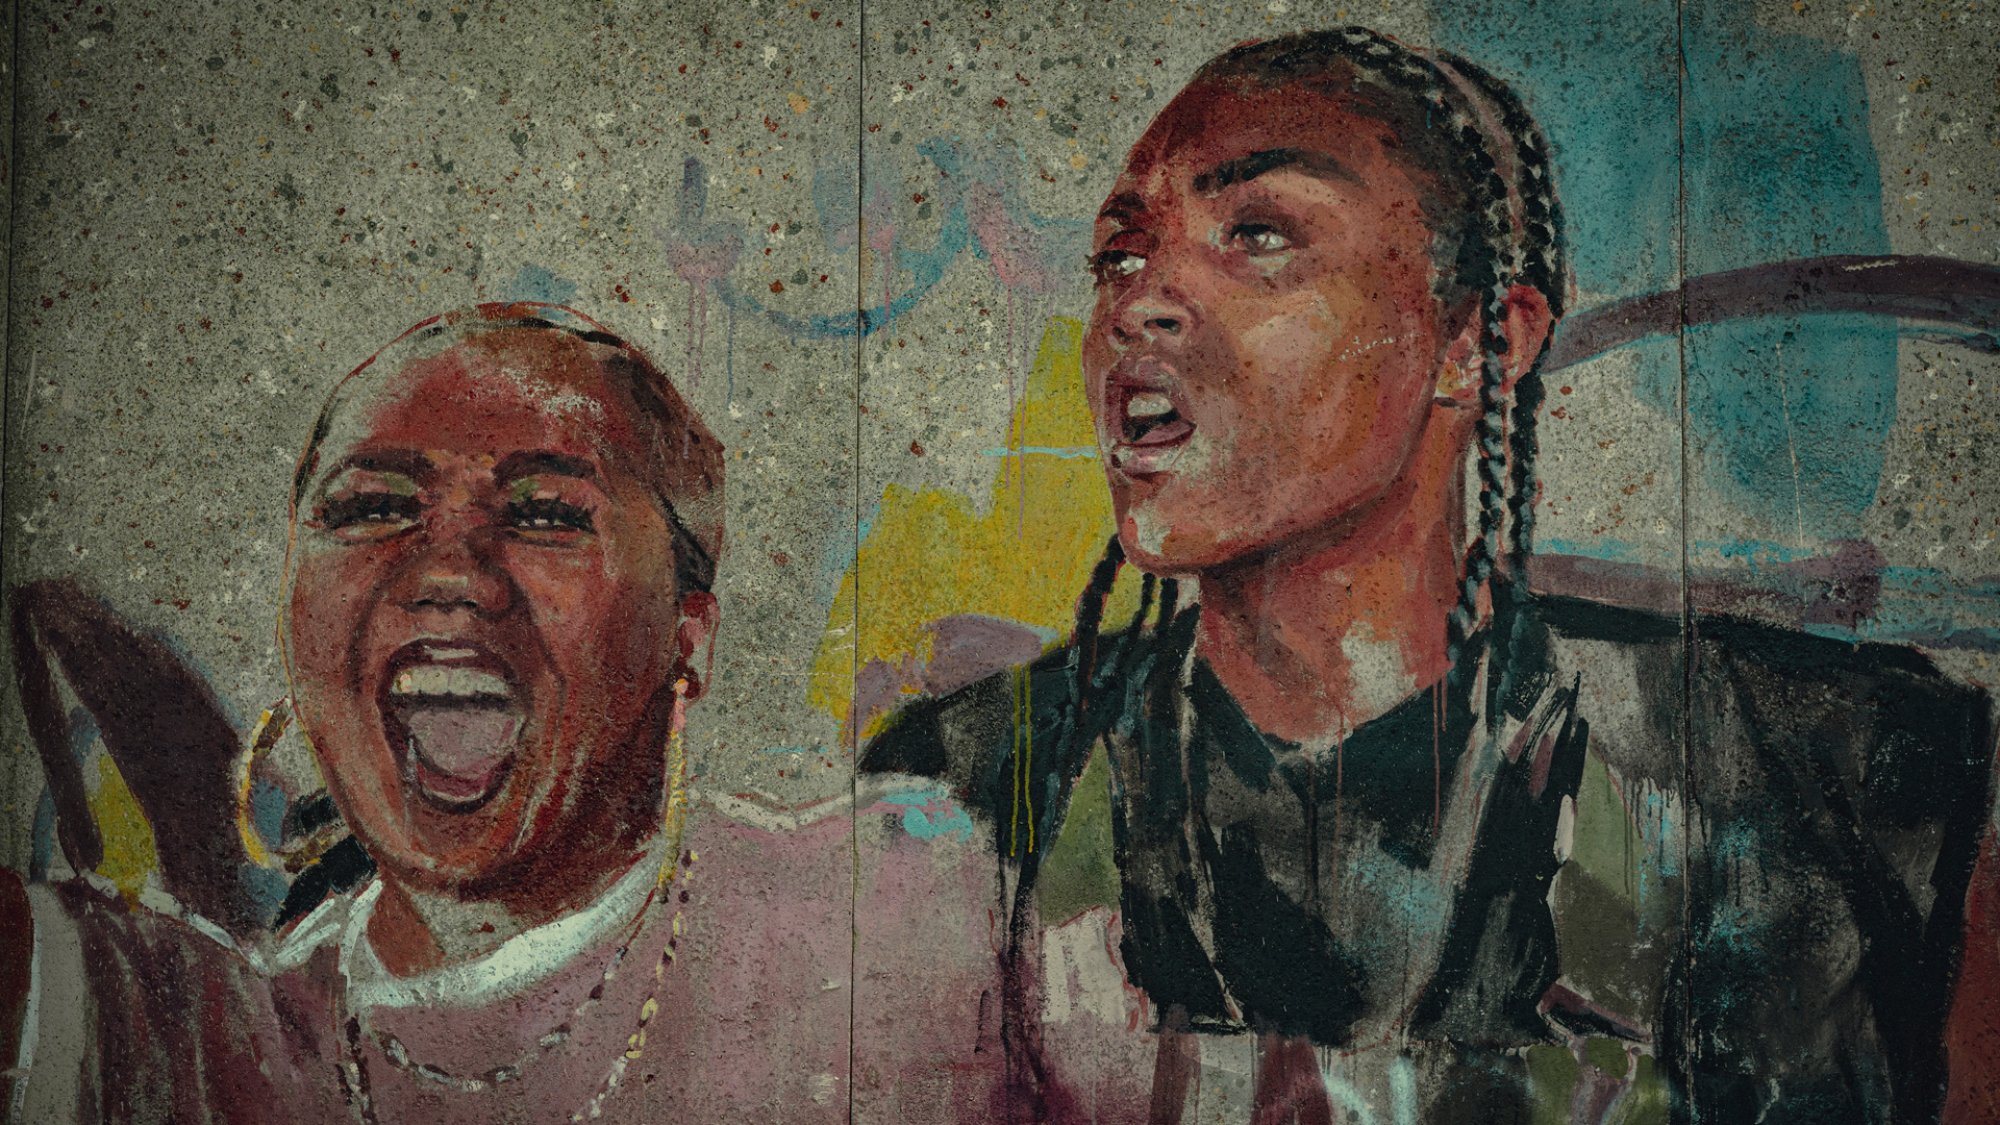 A mural of two women smiling and protesting in the show "Top Boy"